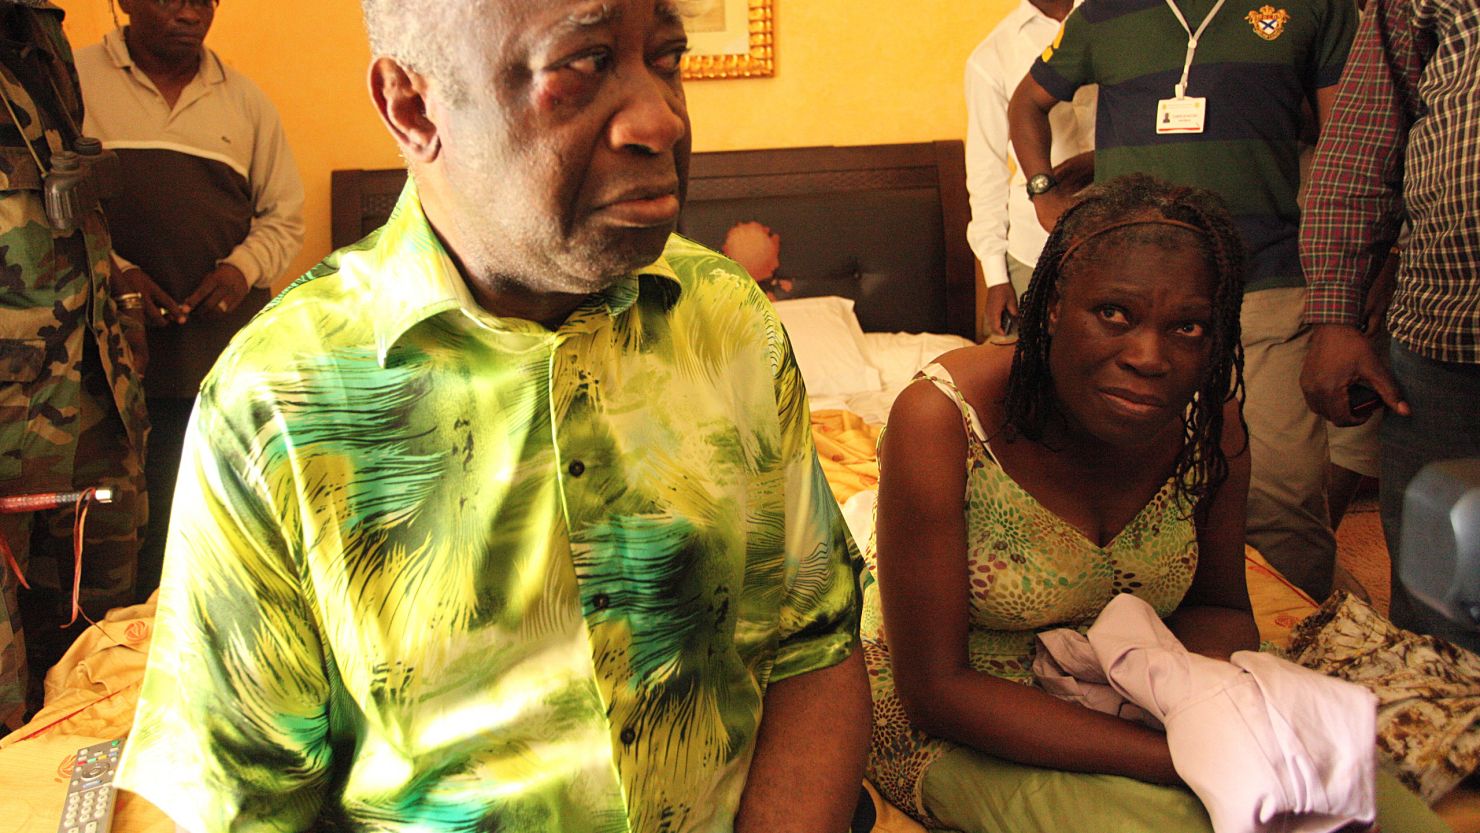 (File photo) Ivory Coast strongman Laurent Gbagbo and his wife, Simone, after their arrested on April 11, 2011.